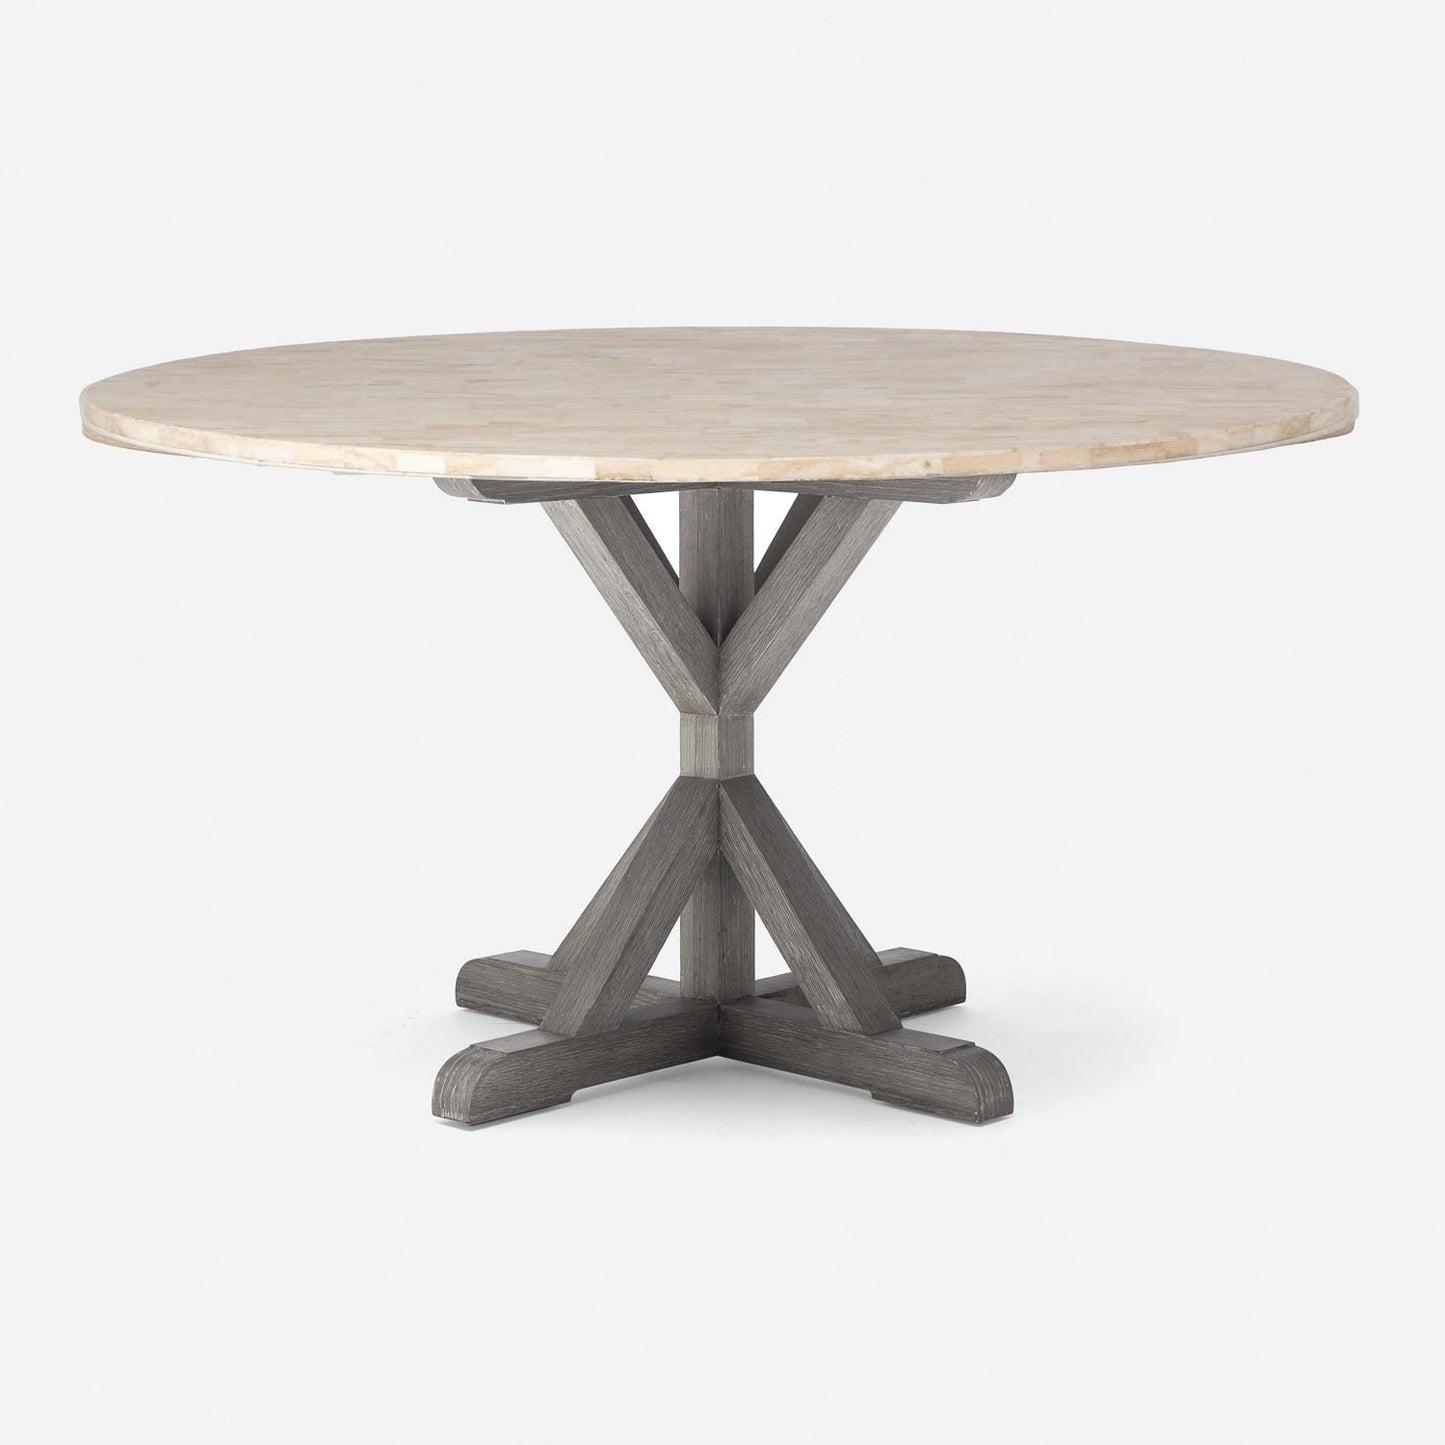 Made Goods Dane 72" x 30" Gray Cerused Oak Dinning Table With Round Beige Crystal Stone Table Top